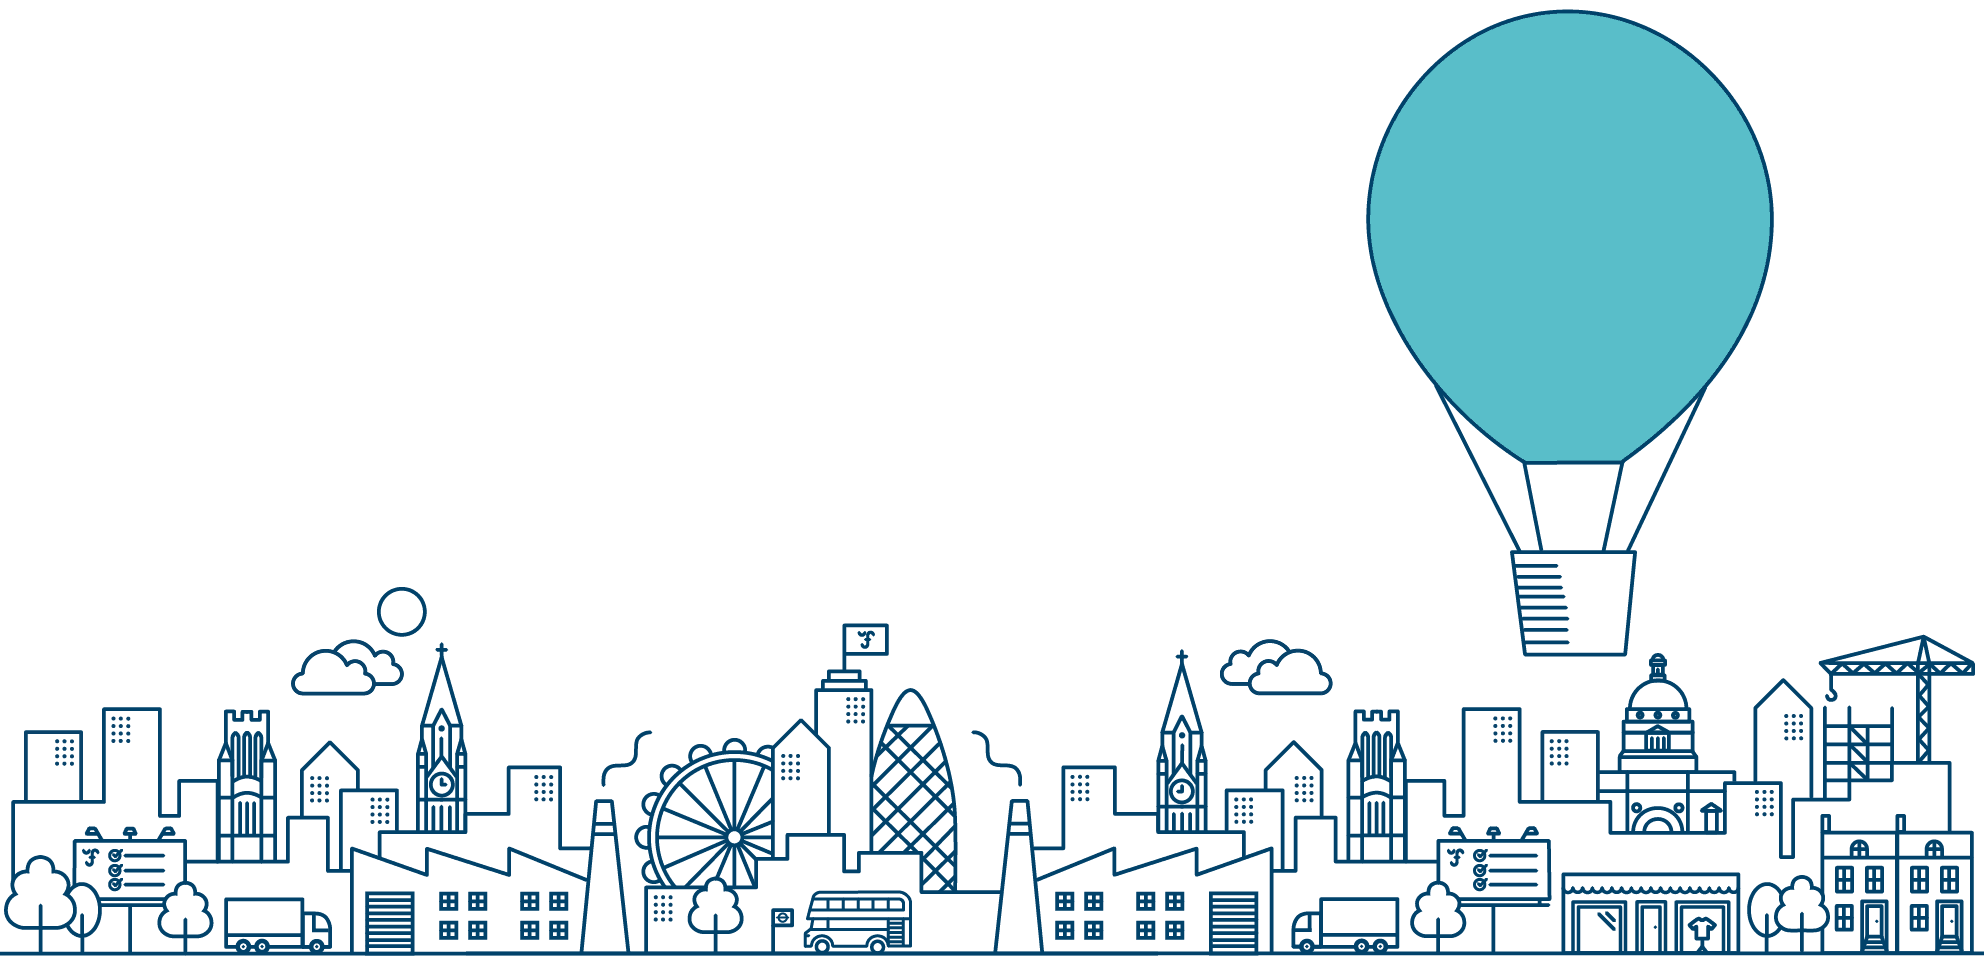 Ultimate Finance cityscape illustration with light blue hot air balloon flying